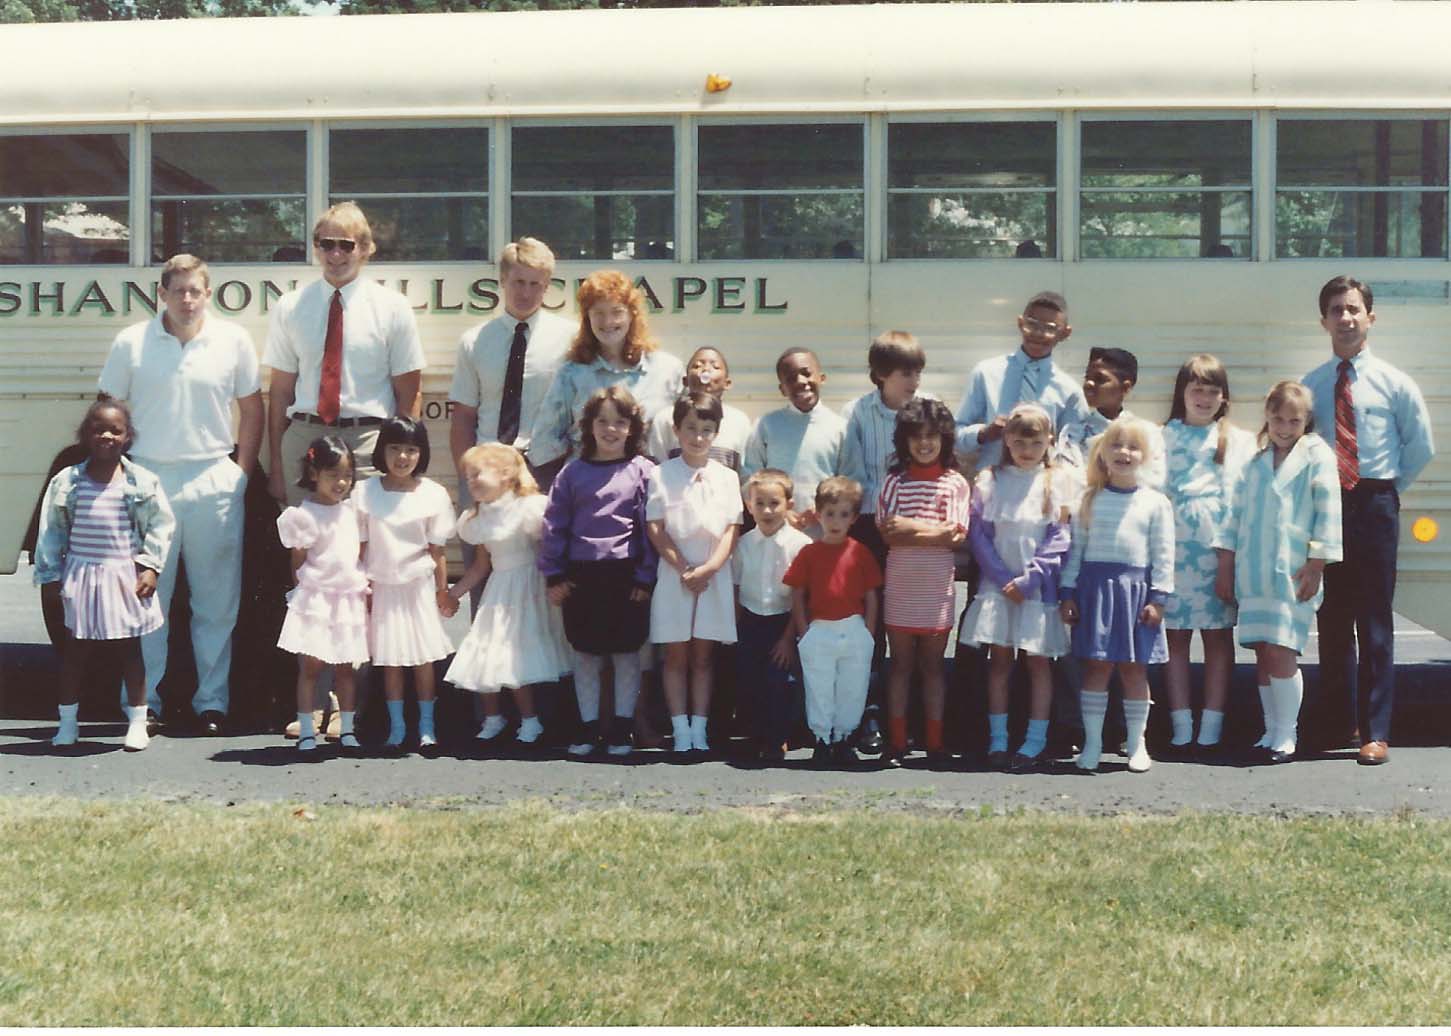 Sunday school class picture from 1989